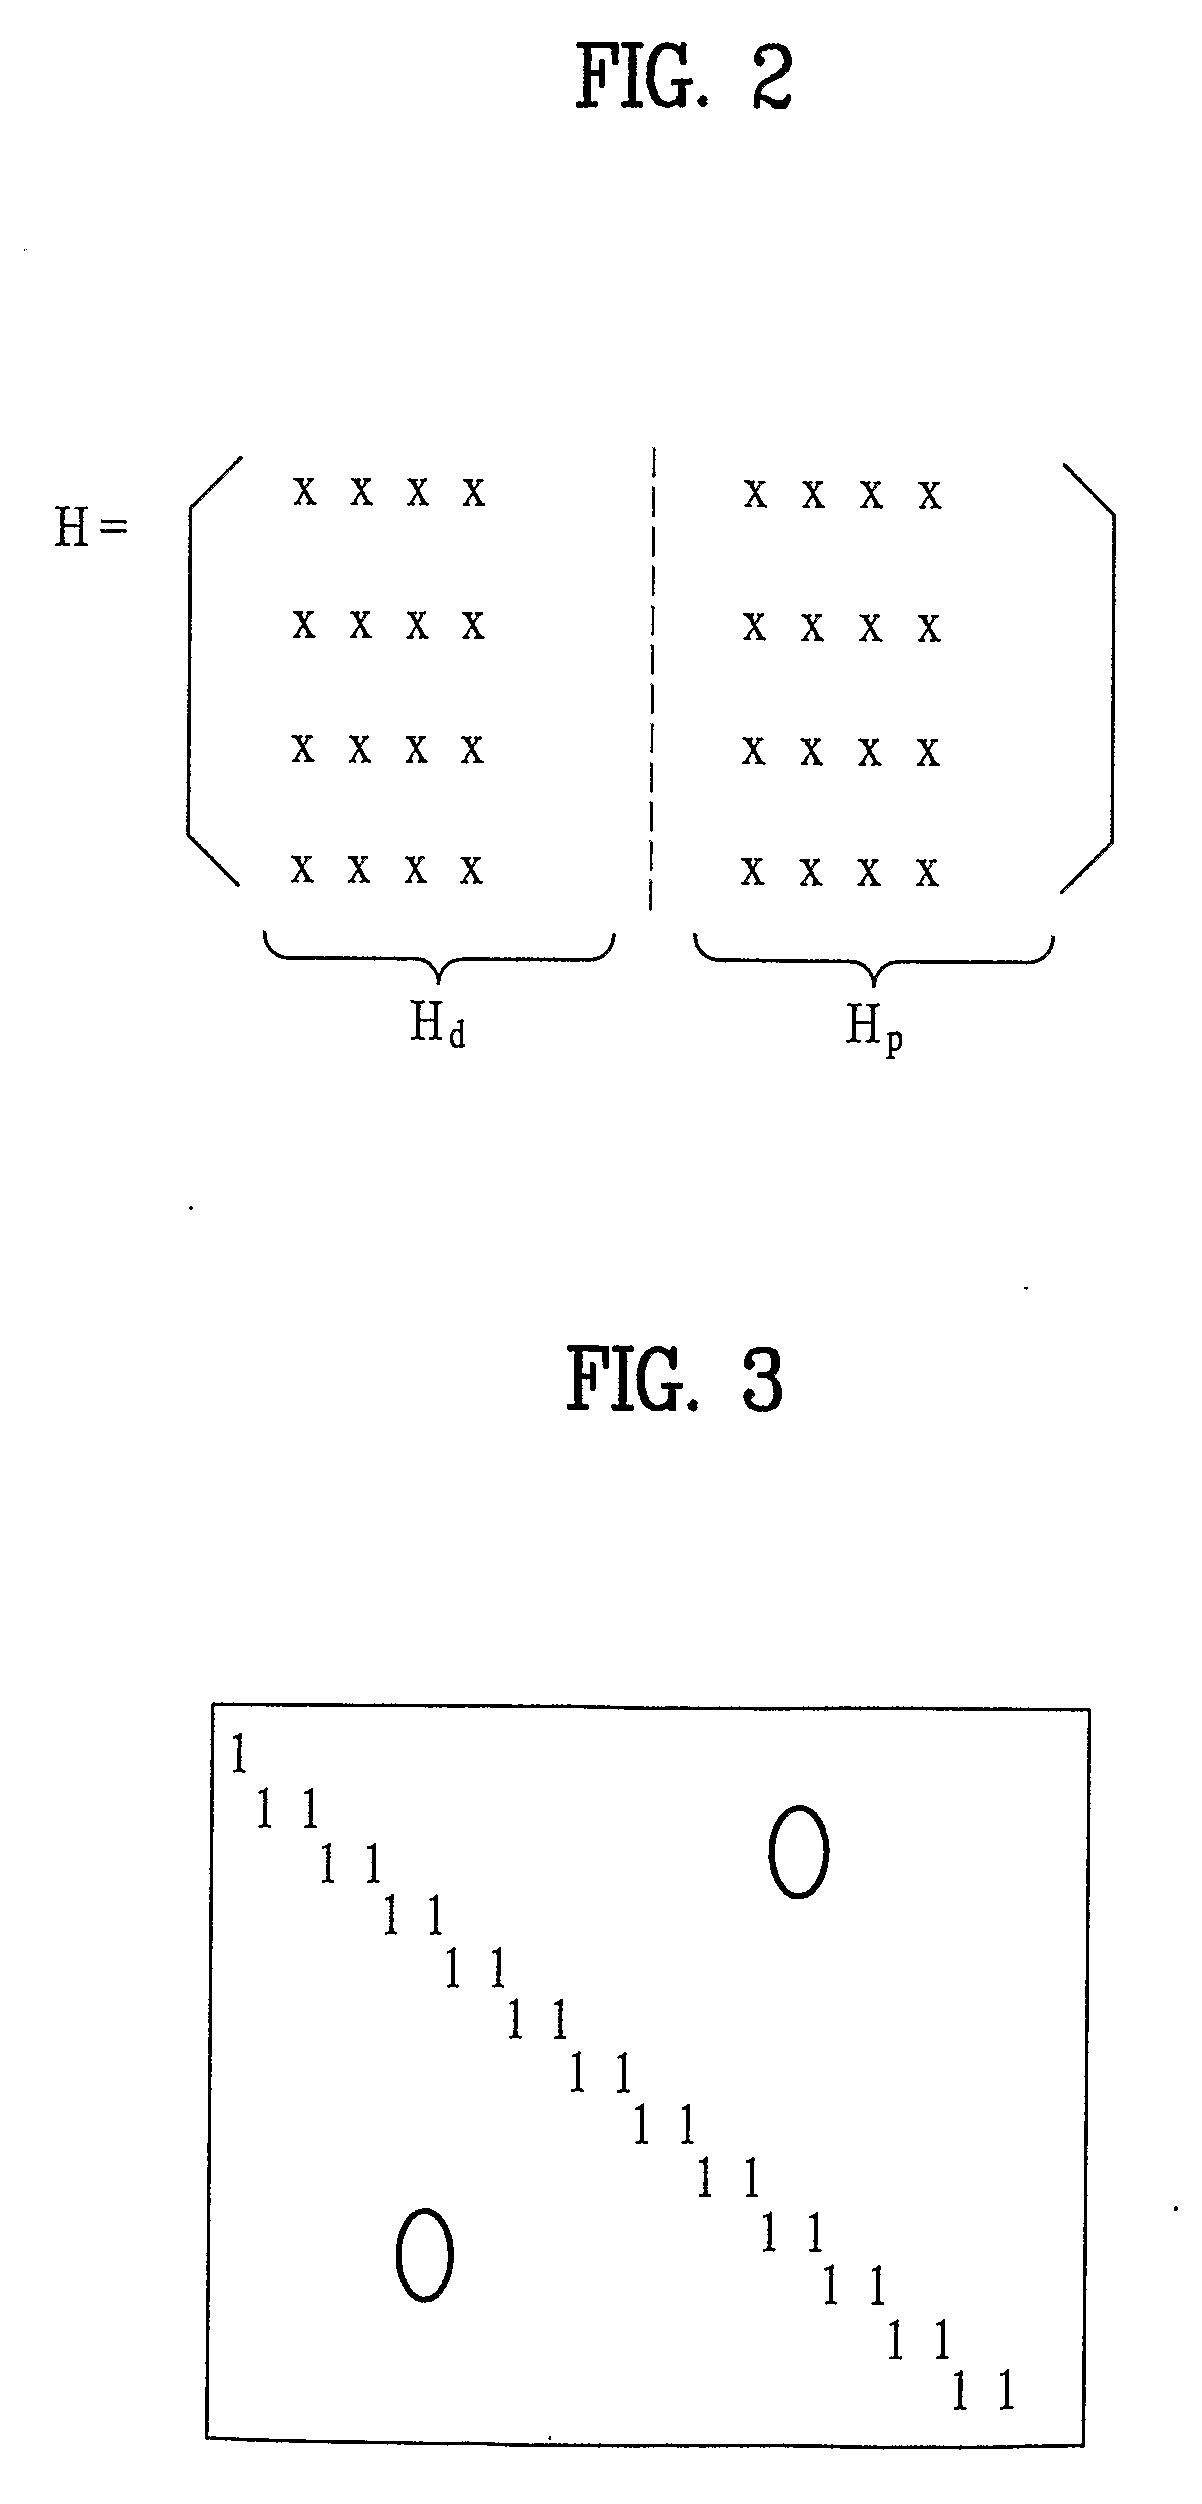 Method of Encoding and Decoding Using Low Density Parity Check Code